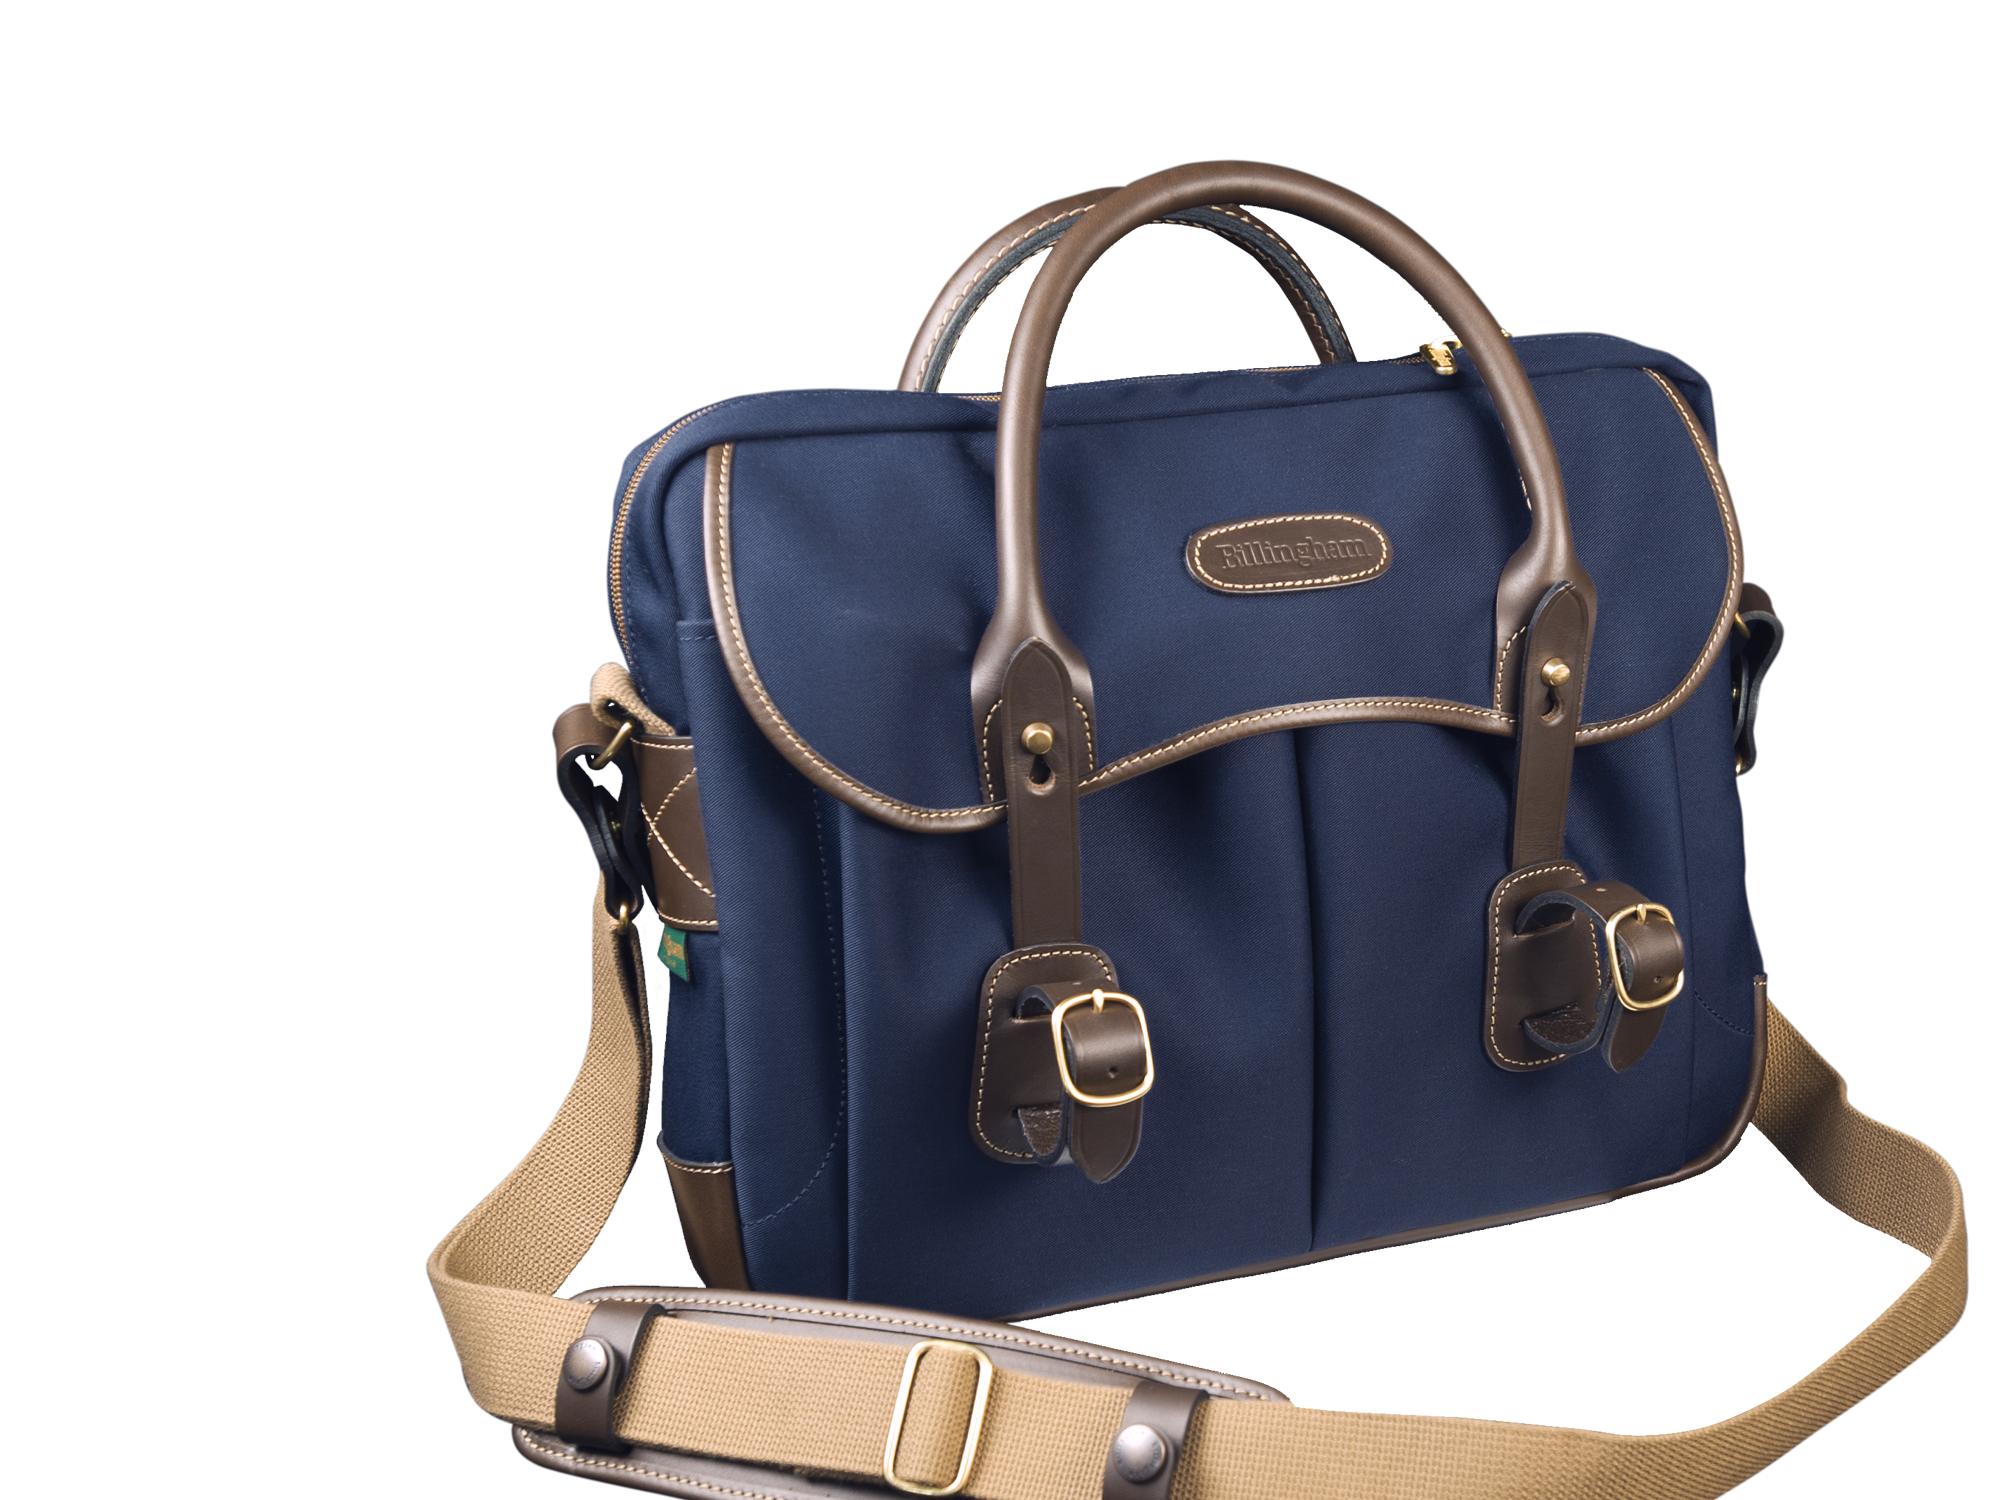 Thomas Briefcase & Laptop Bag - Navy Canvas / Chocolate Leather